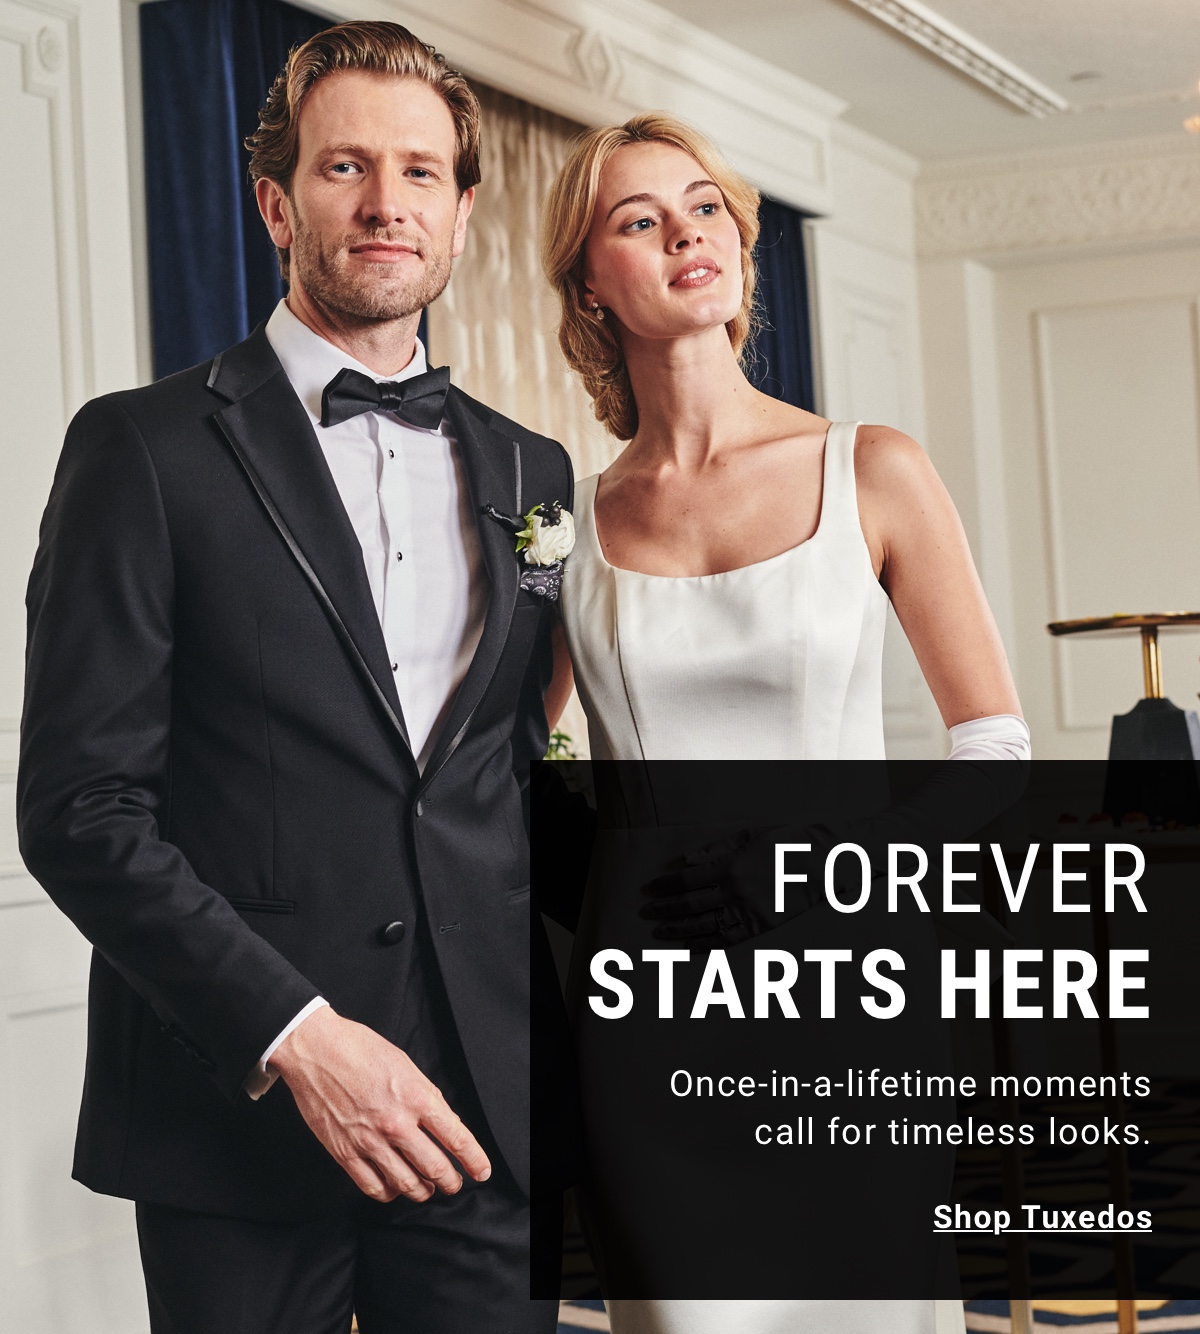 Forever Starts Here|Shop Tuxedos